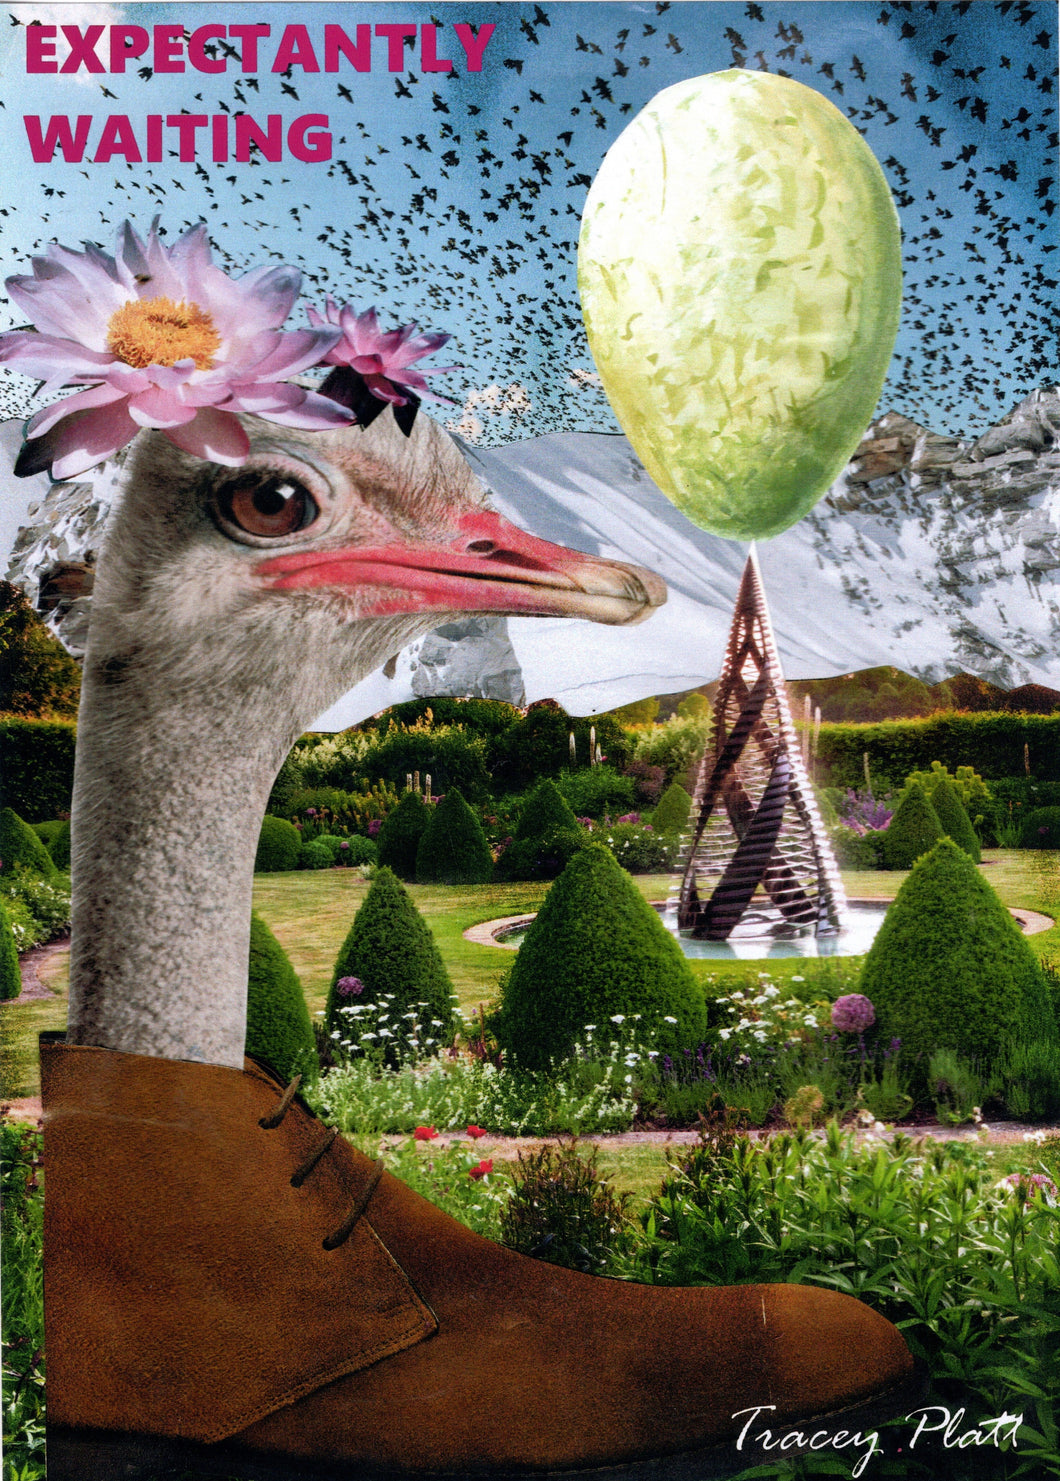 Printed Card - Humorous Surreal Collage - EXPECTANTLY WAITING